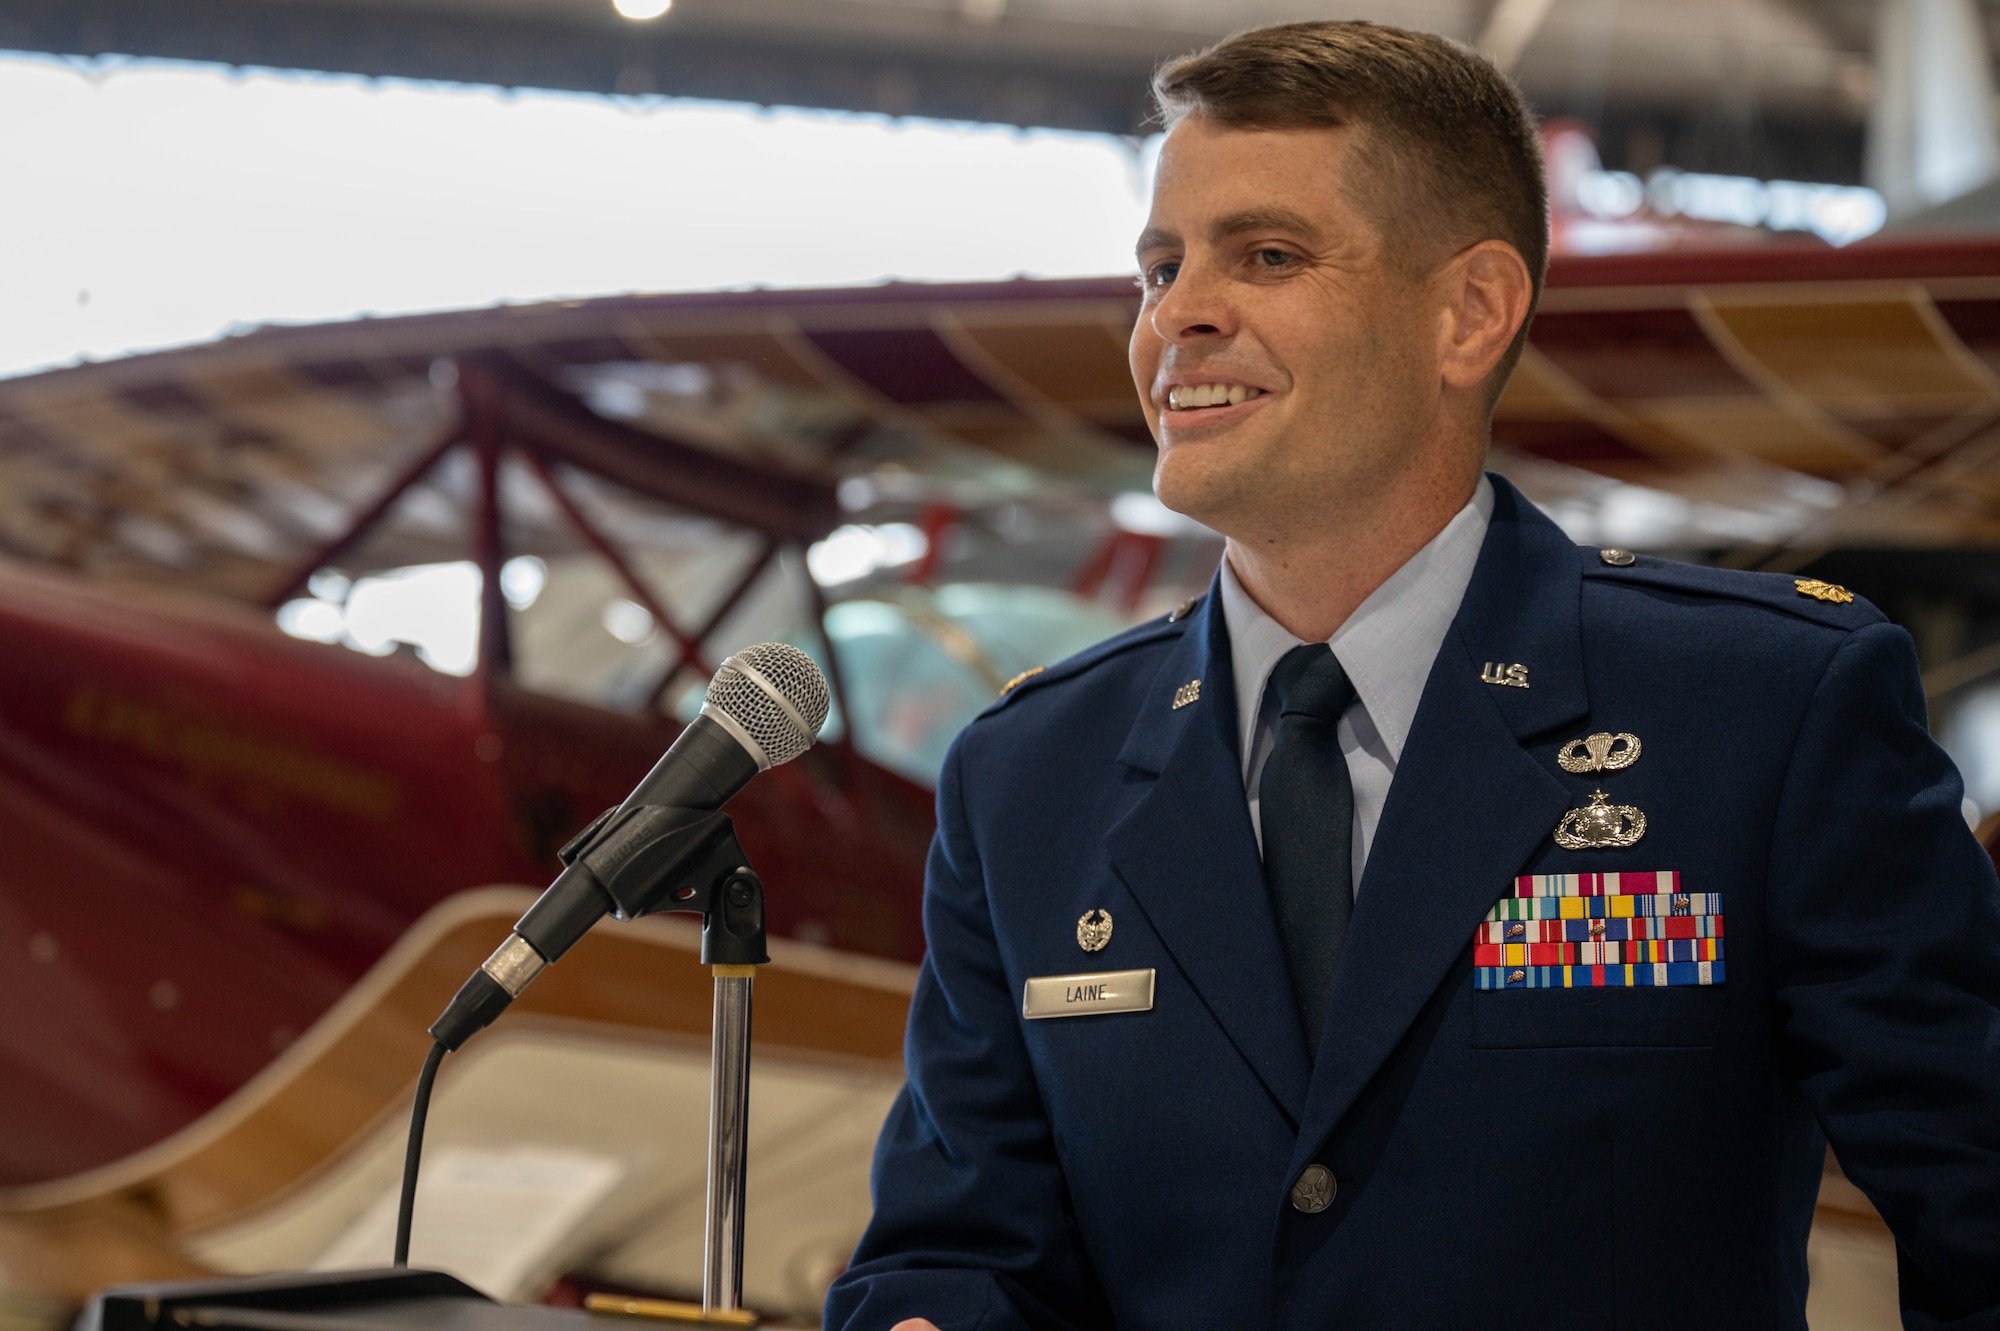 A U.S. Air Force Major speaks at a podium.